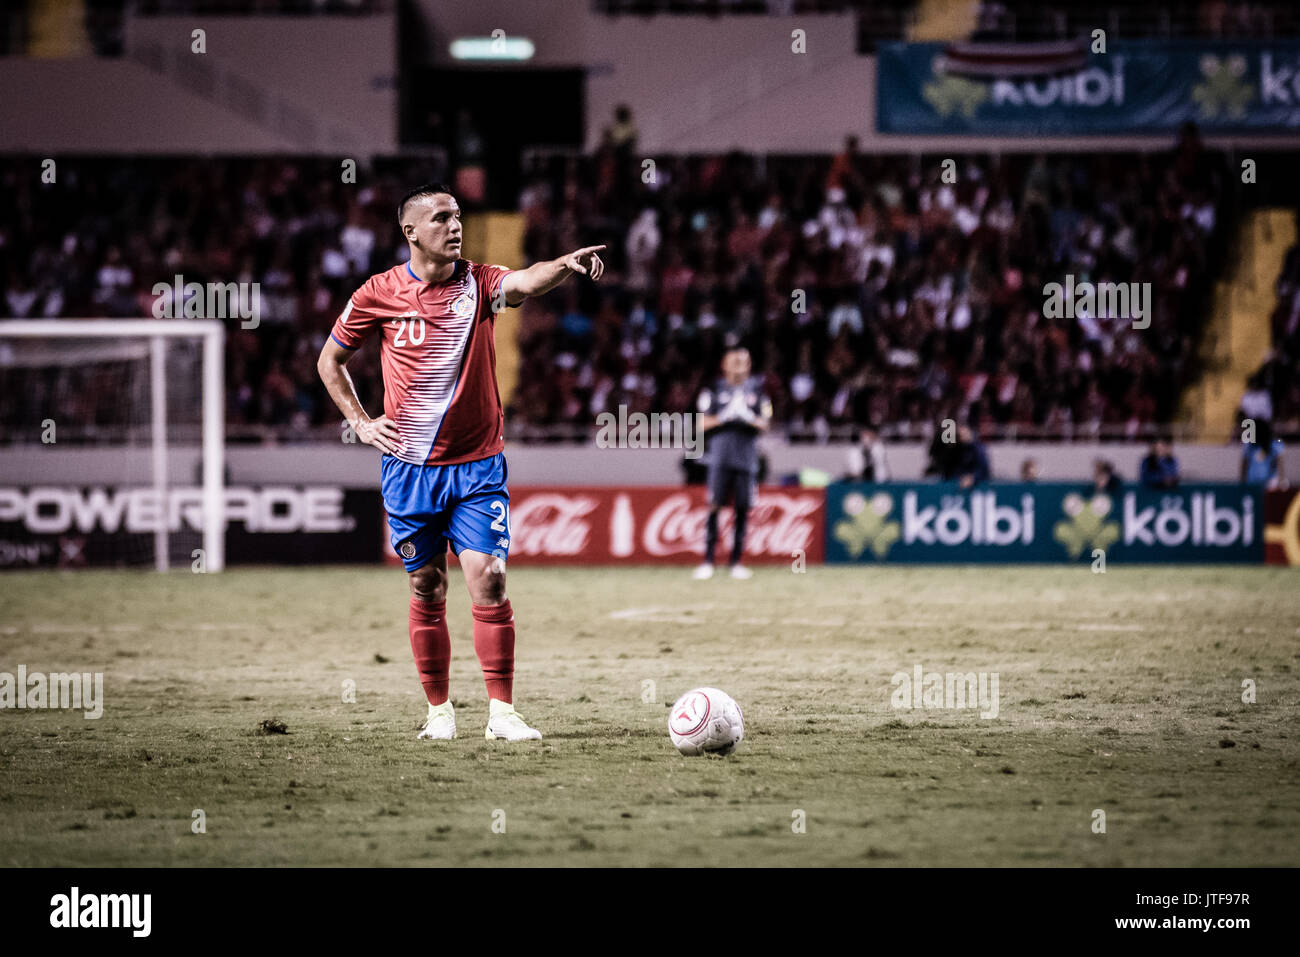 SAN JOSE, COSTA RICA. JUNE 13, 2017 - David Guzman. Costa Rica won 2-1 over Trinidad and Tobago, as Matchday 6 wrapped up in CONCACAF’s final round of Stock Photo